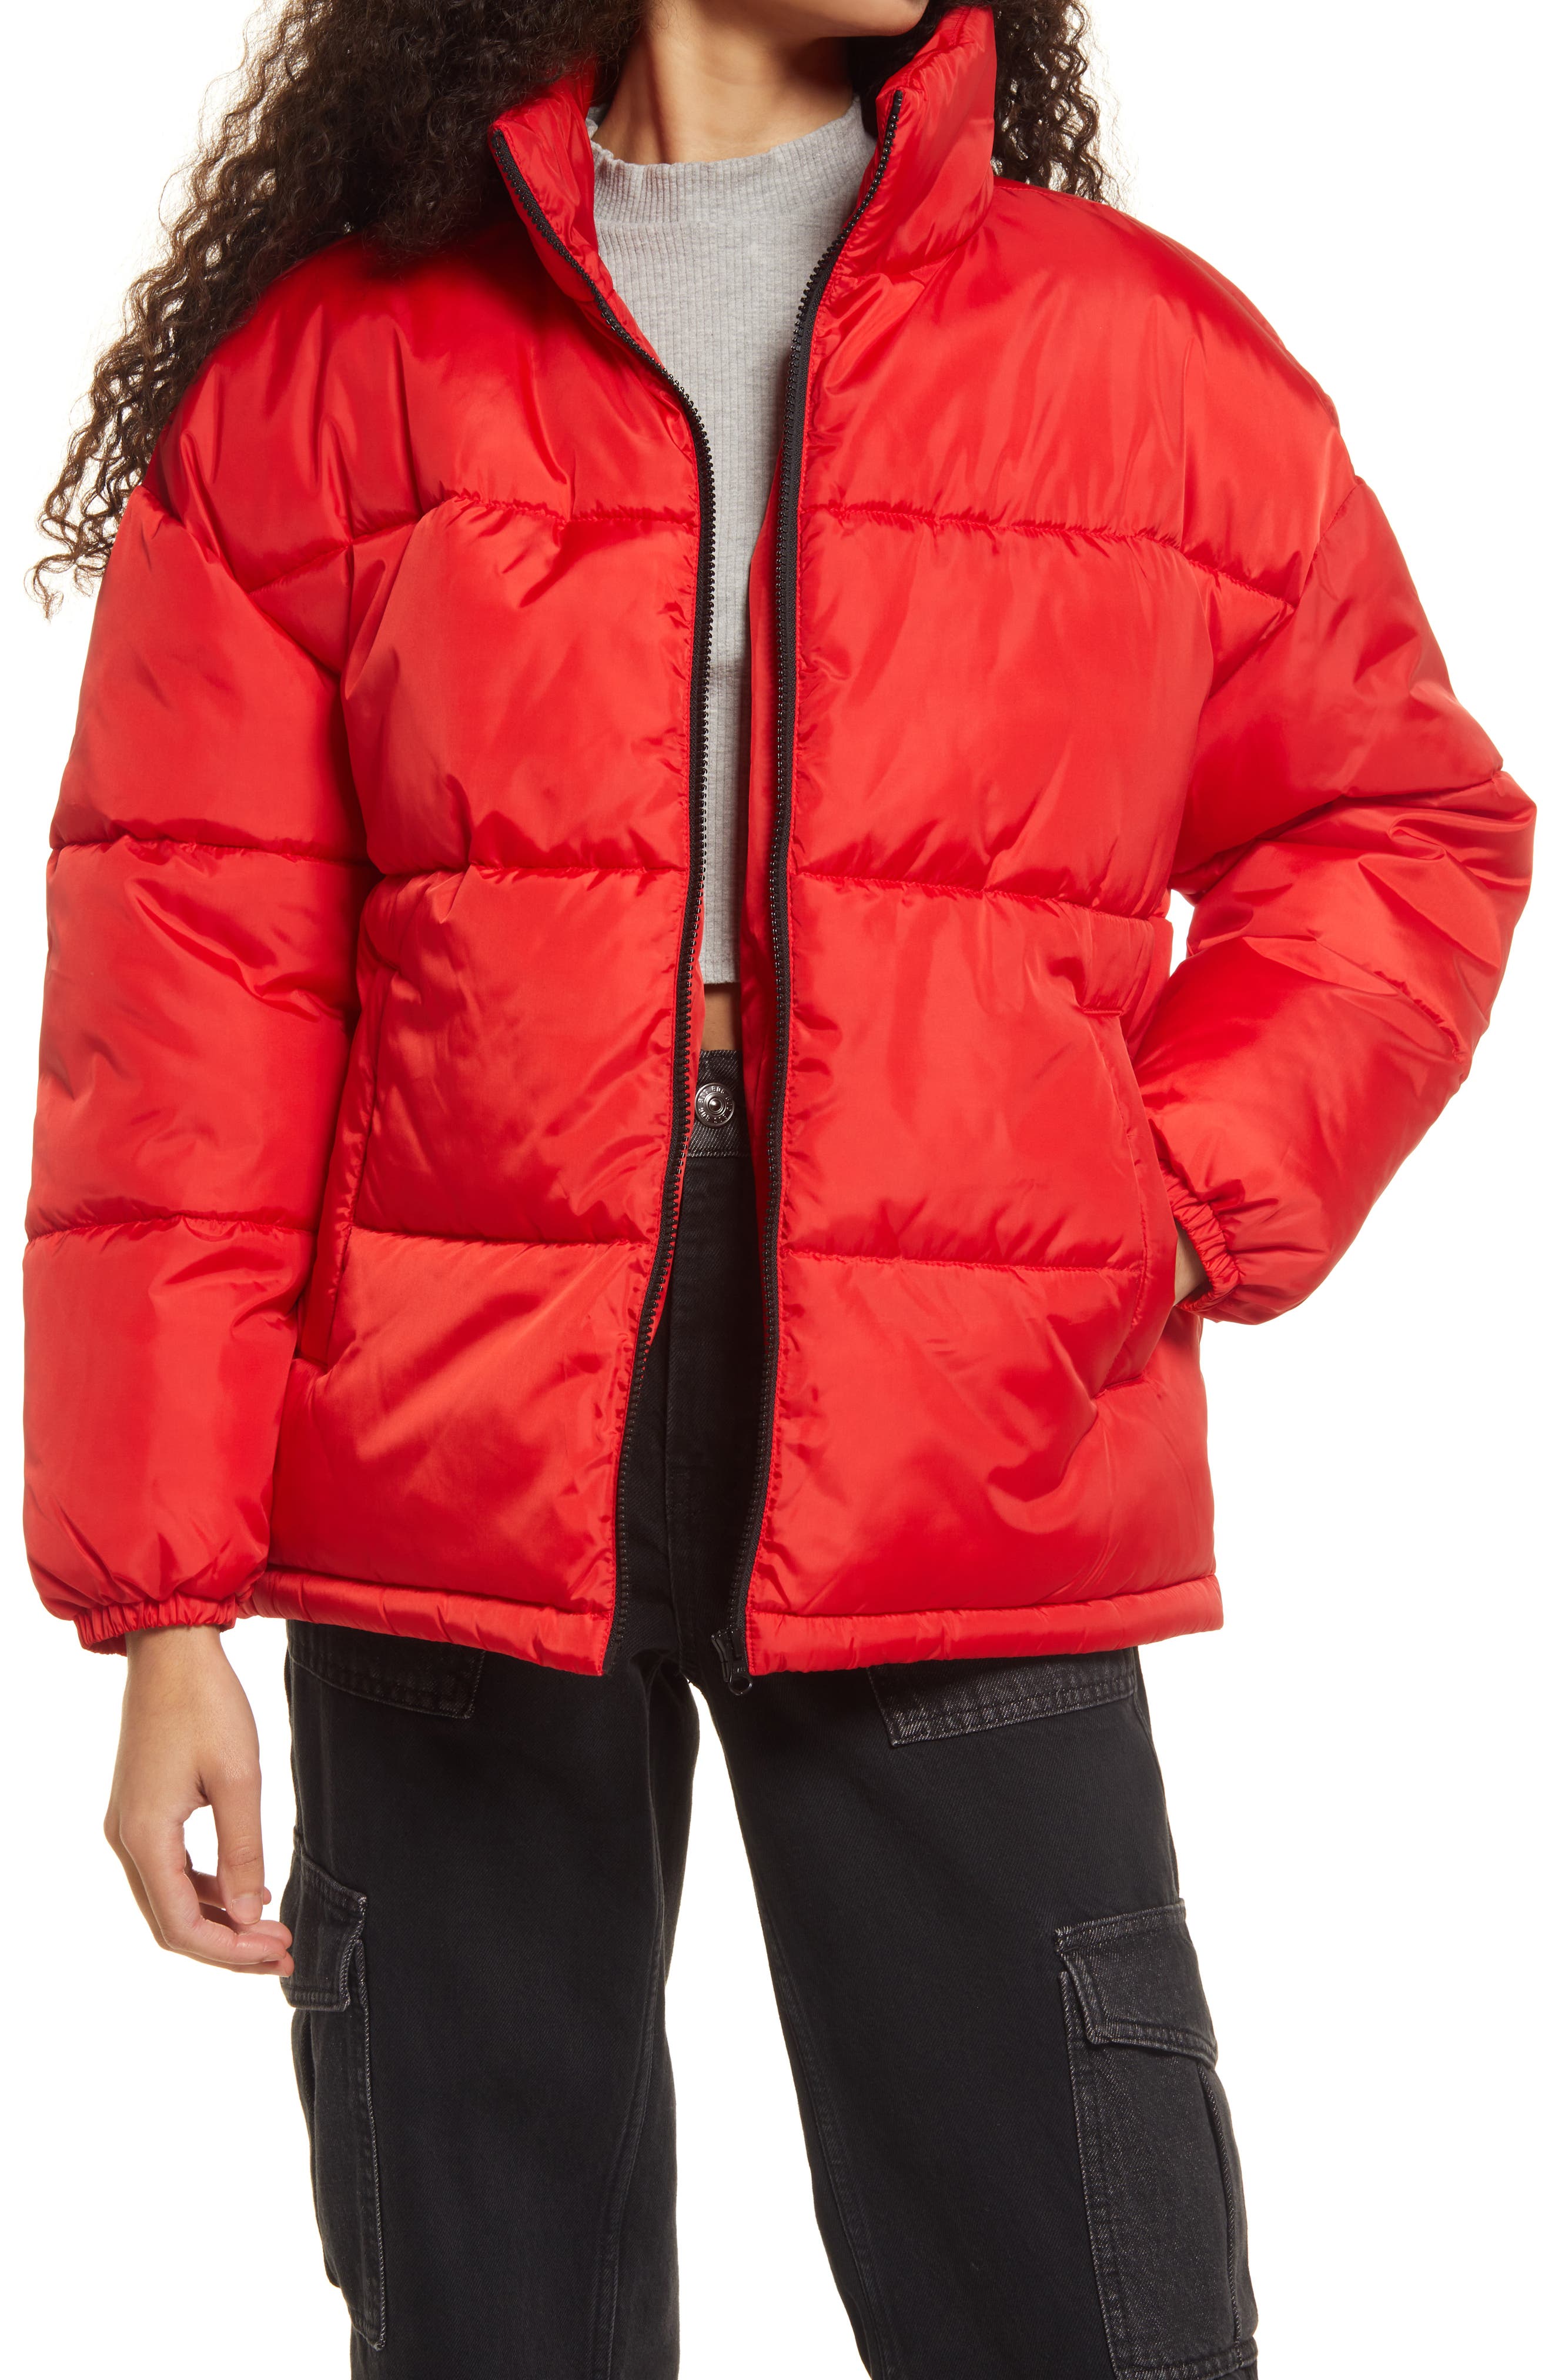 oversized red puffer jacket